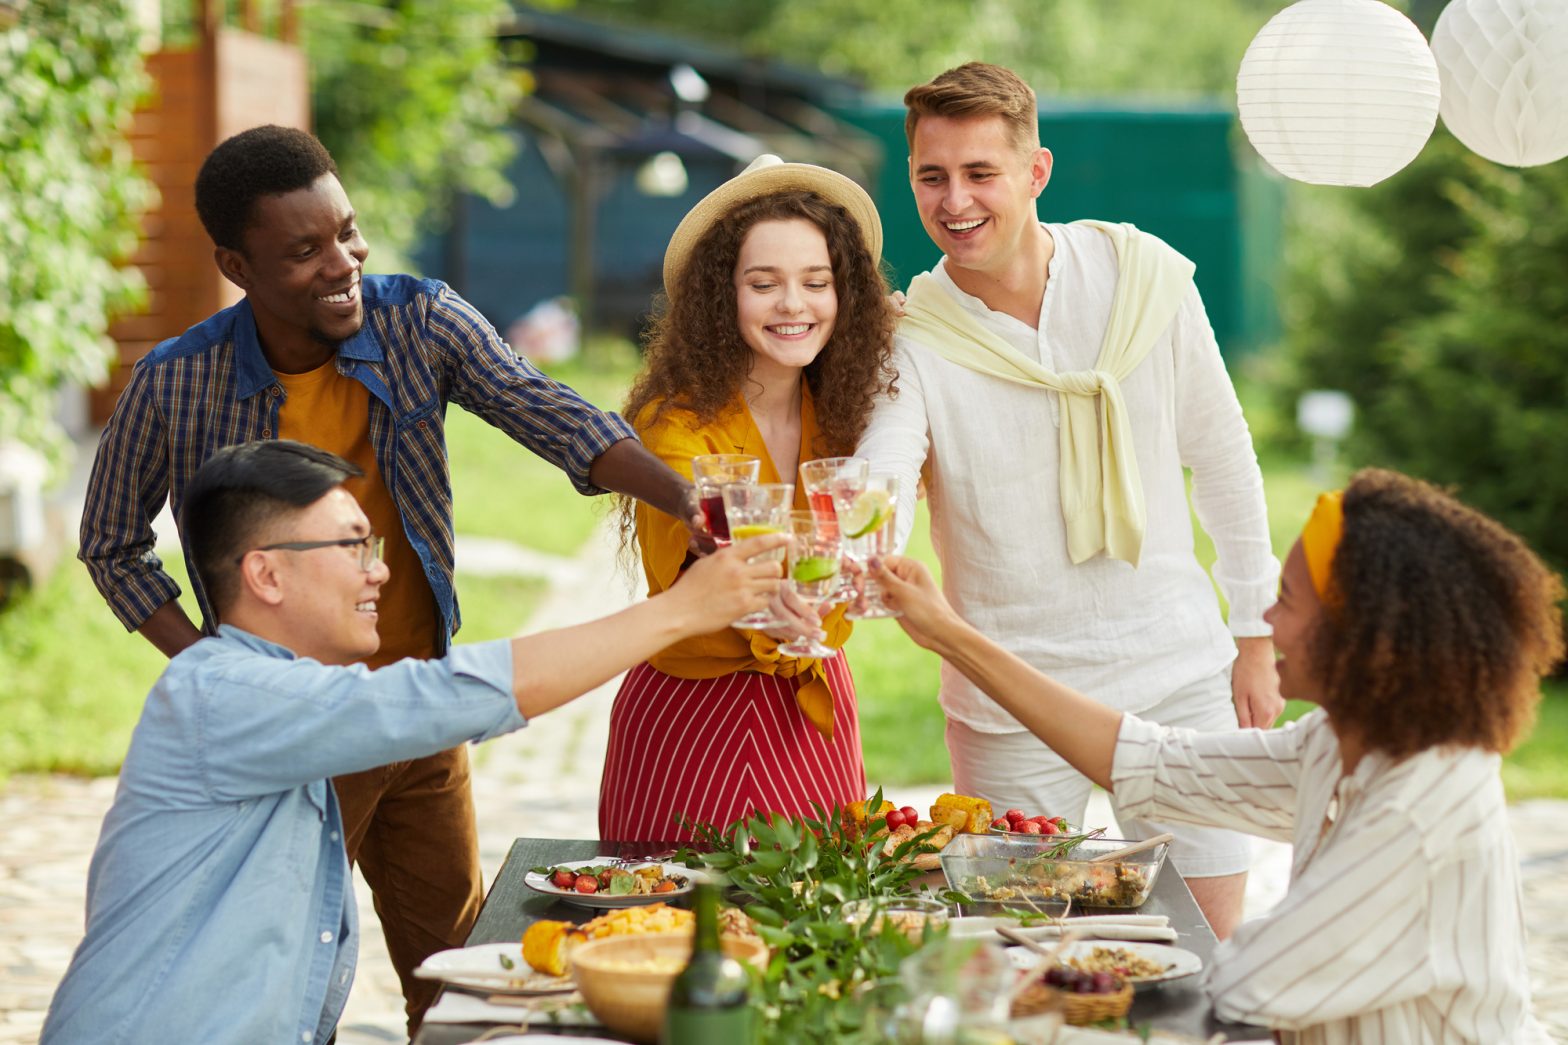 A diverse group of adults toast at a picnic table in an outdoor space.